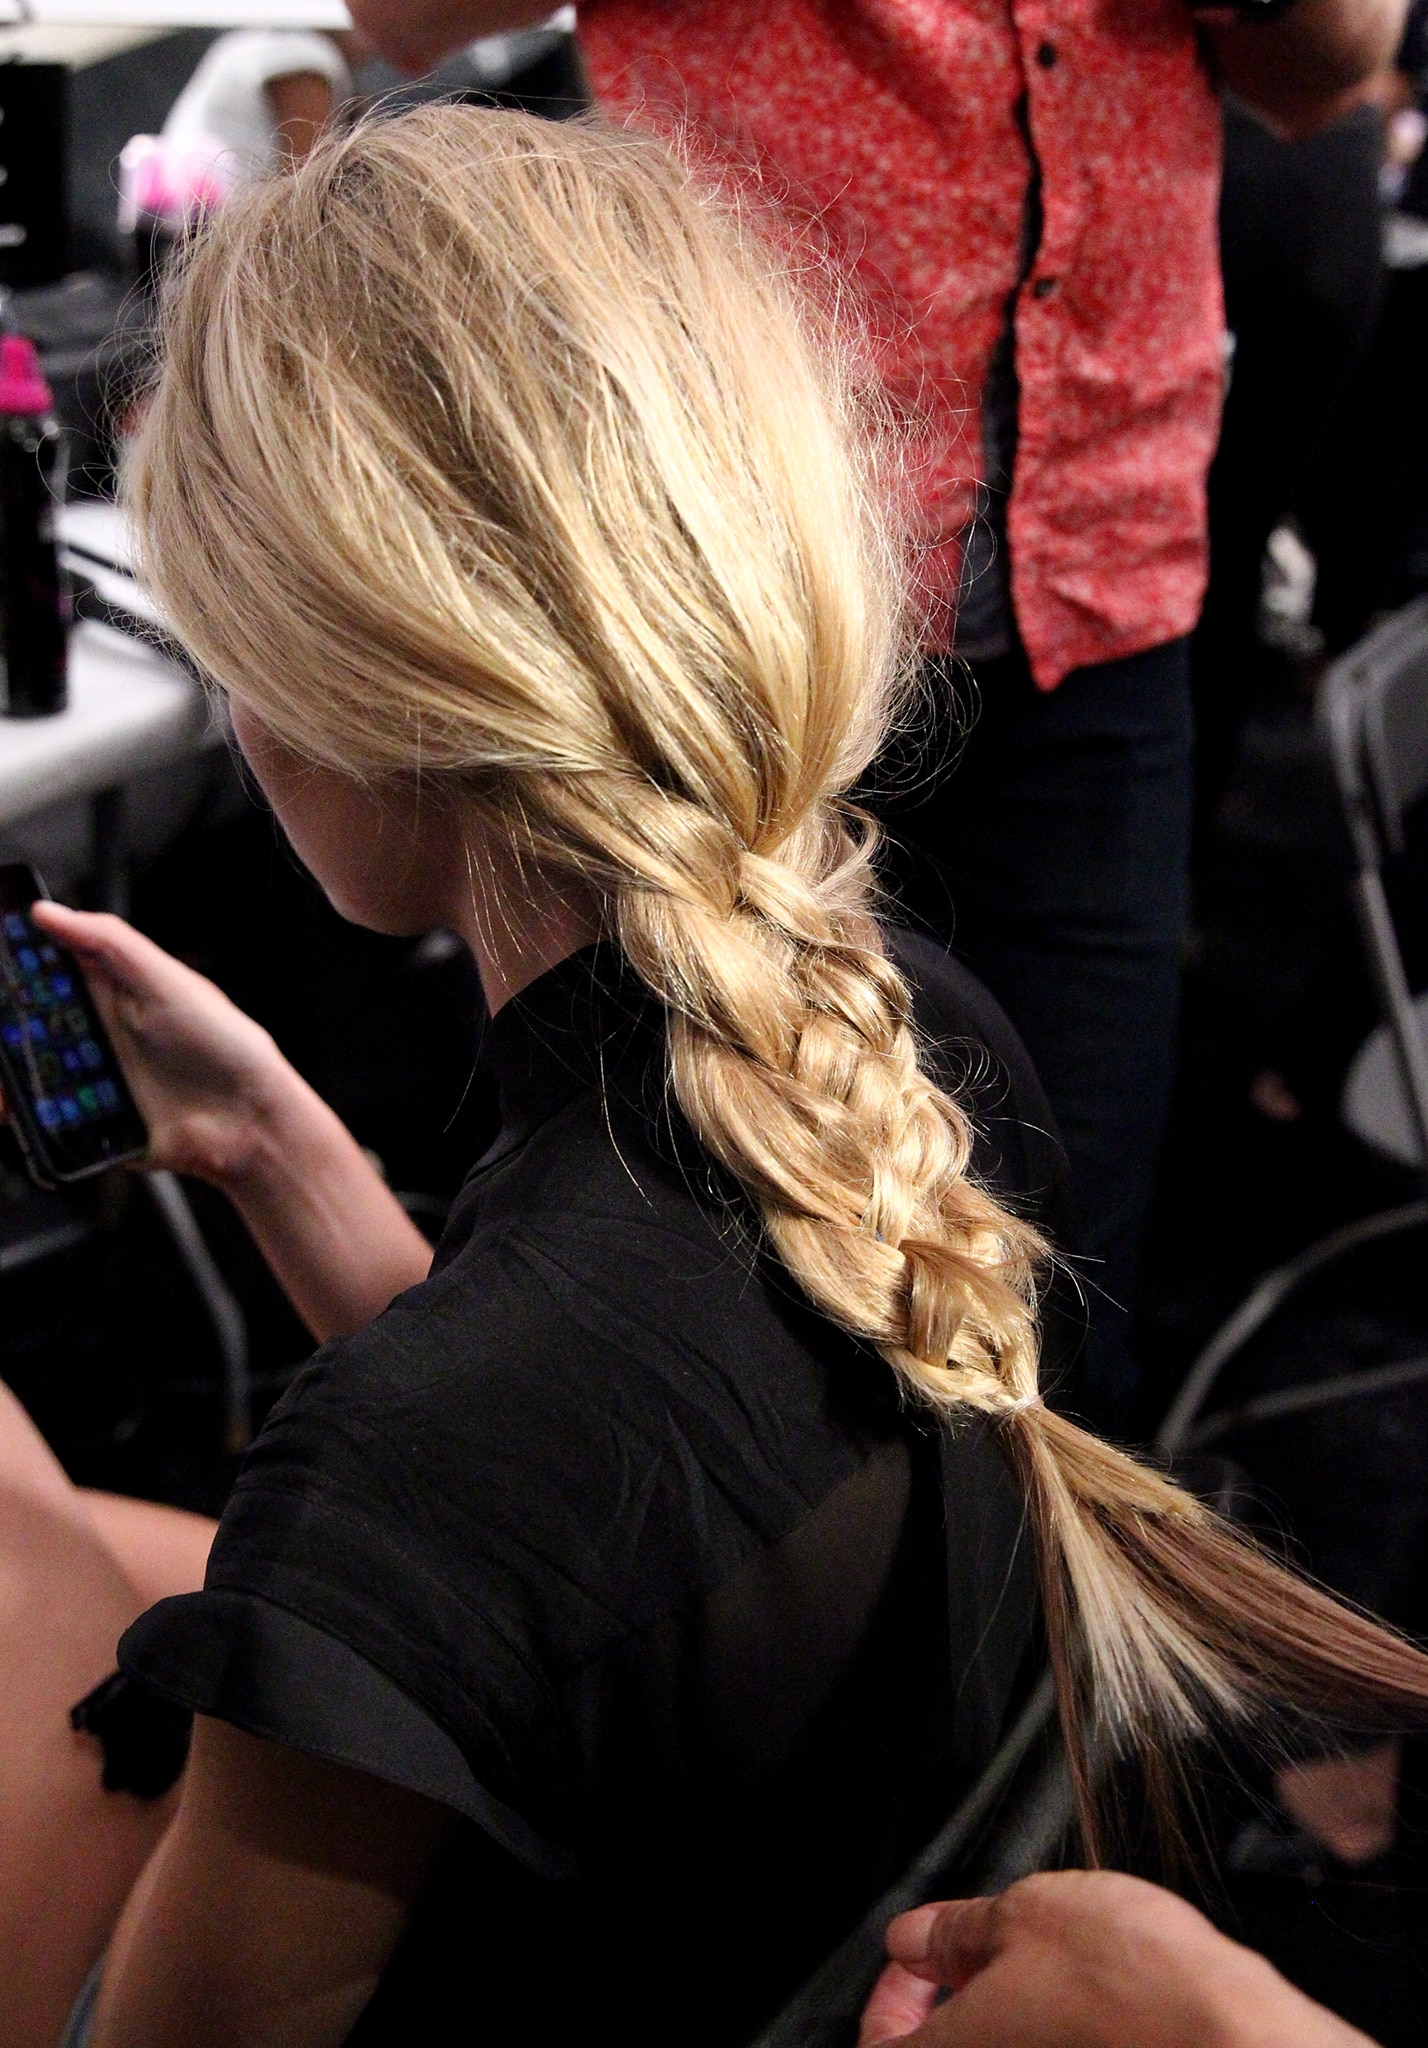 A blonde model sitting down backstage with her hair in a long, thick braid